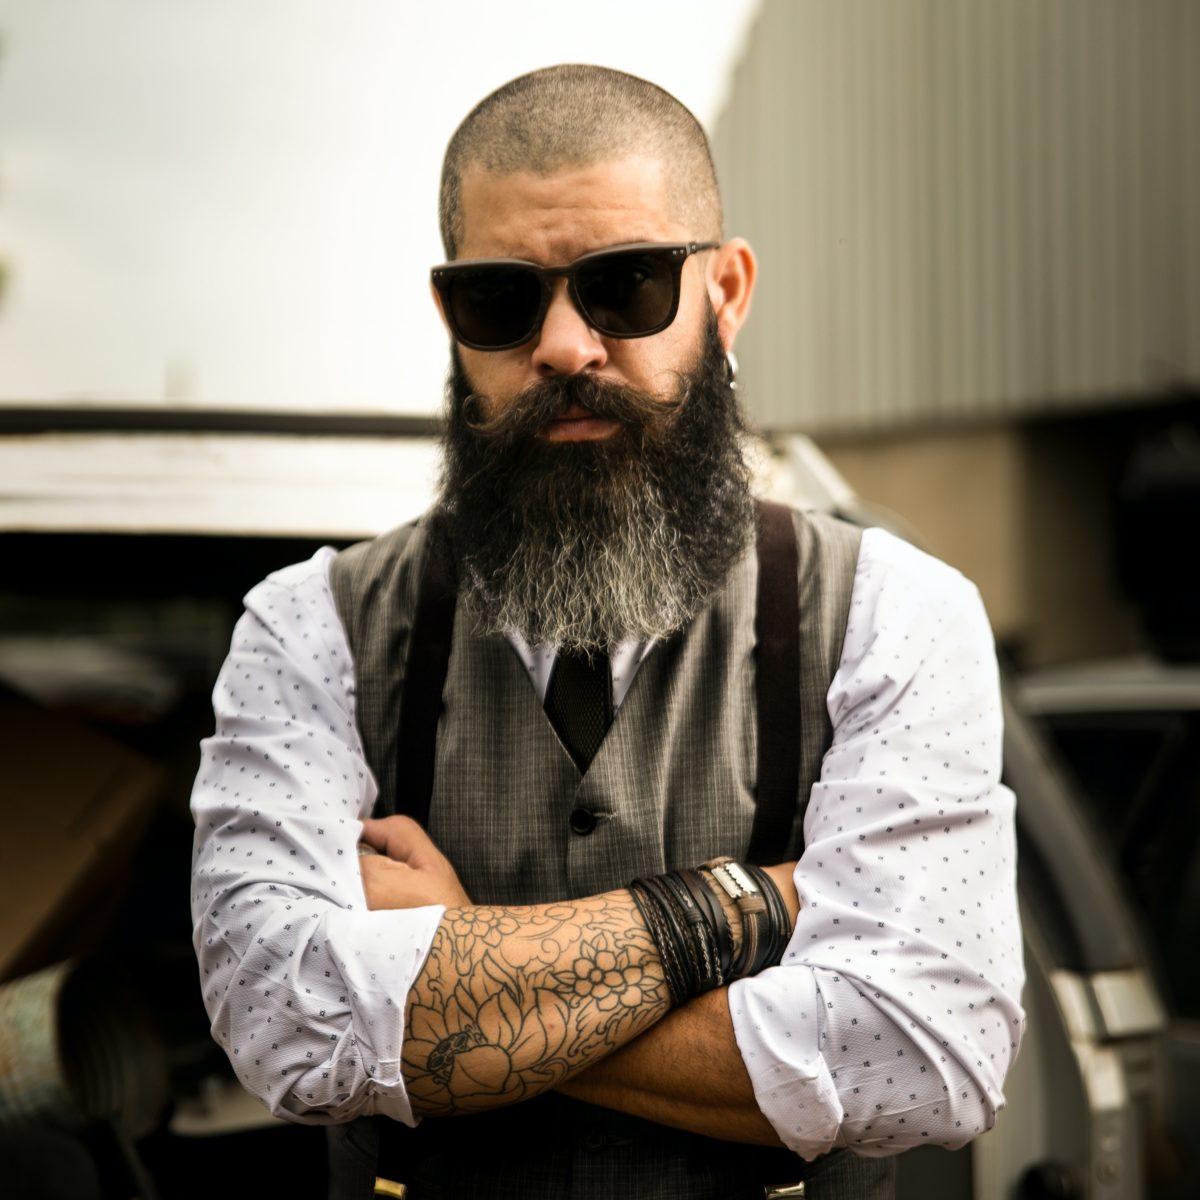 The Best Beard Styles To Keep You Looking Sharp [2022 Guide]